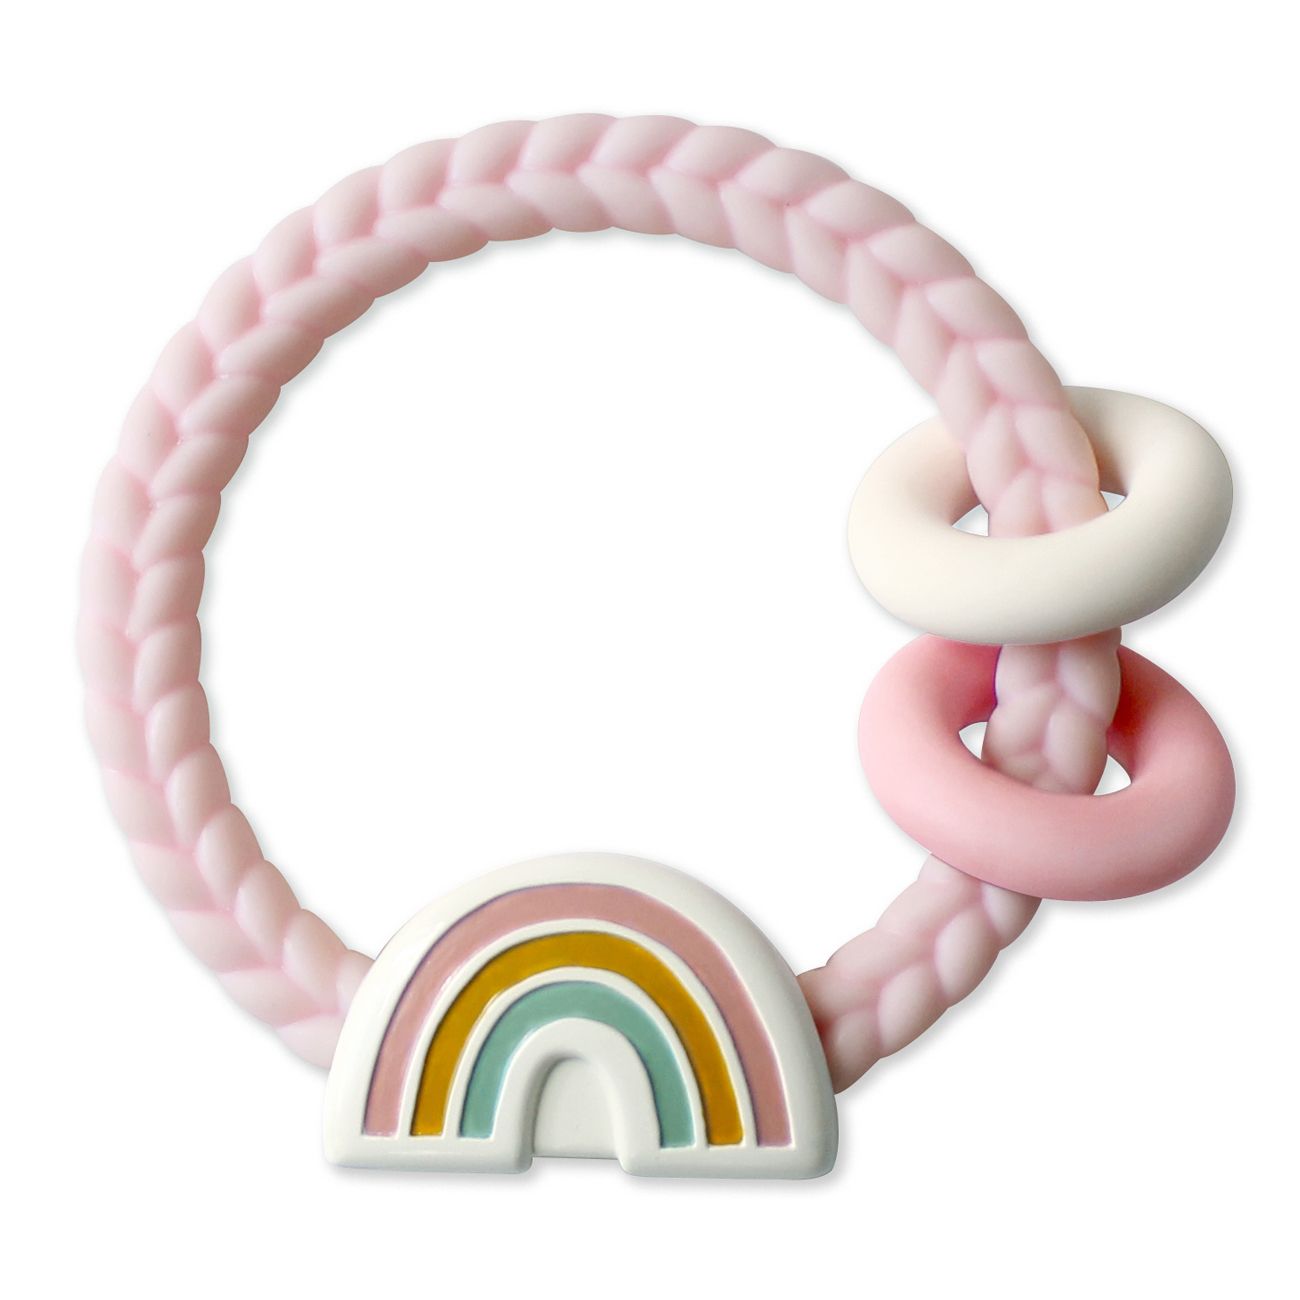 Itzy Ritzy Rattle Silicone Teether Rattles 固齒咬咬環 (Rainbow)